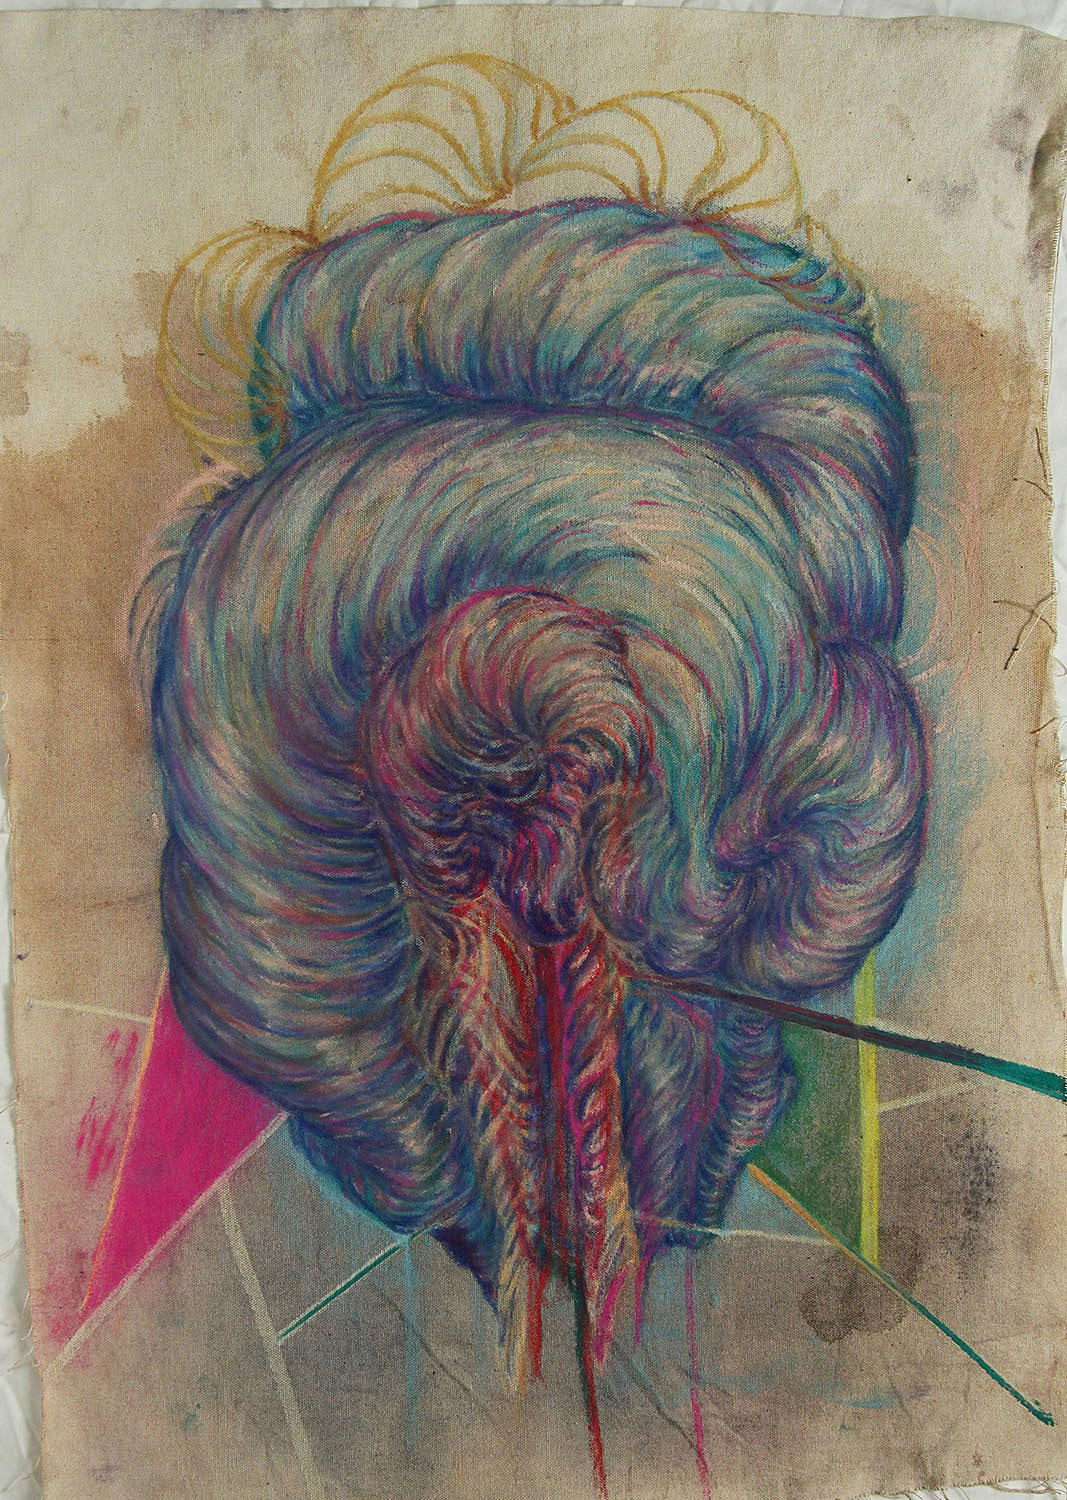 Rachel Joob, PinkGrowth, 2013. Coffee, wine, watercolor and chalk pastel on raw canvas, 27.5 x19 in.